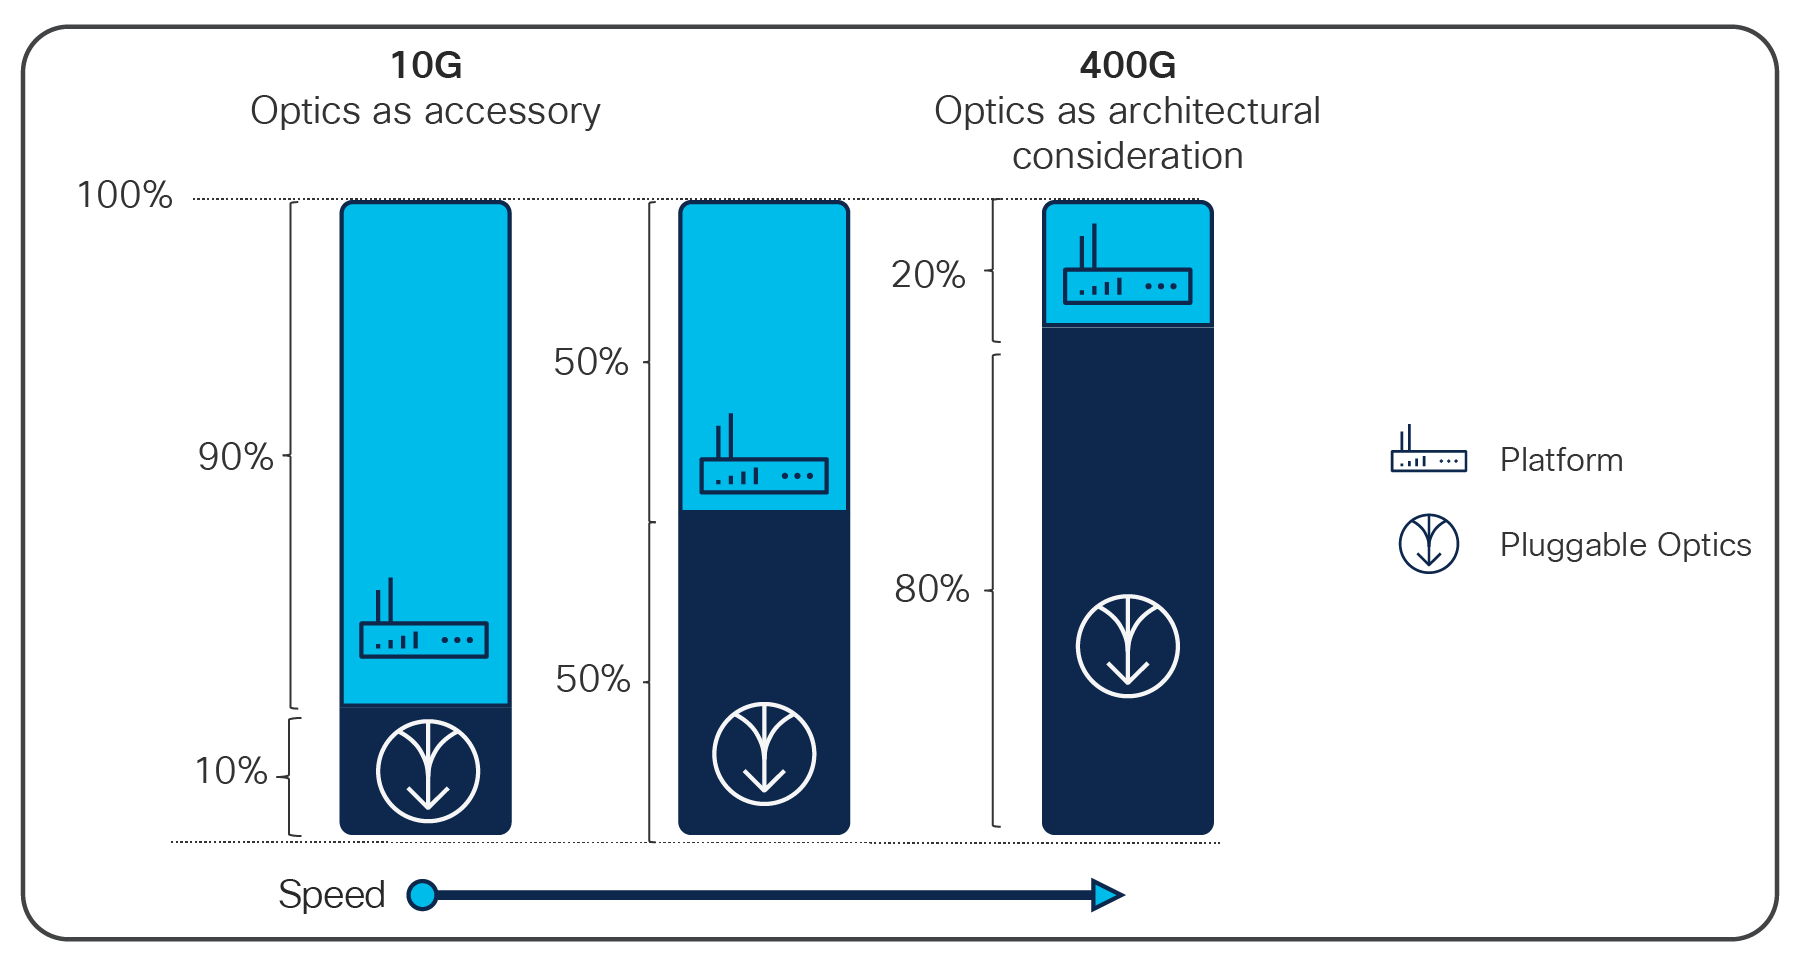 At 100G and 400G data rates, optics consume a more significant portion of the total system cost